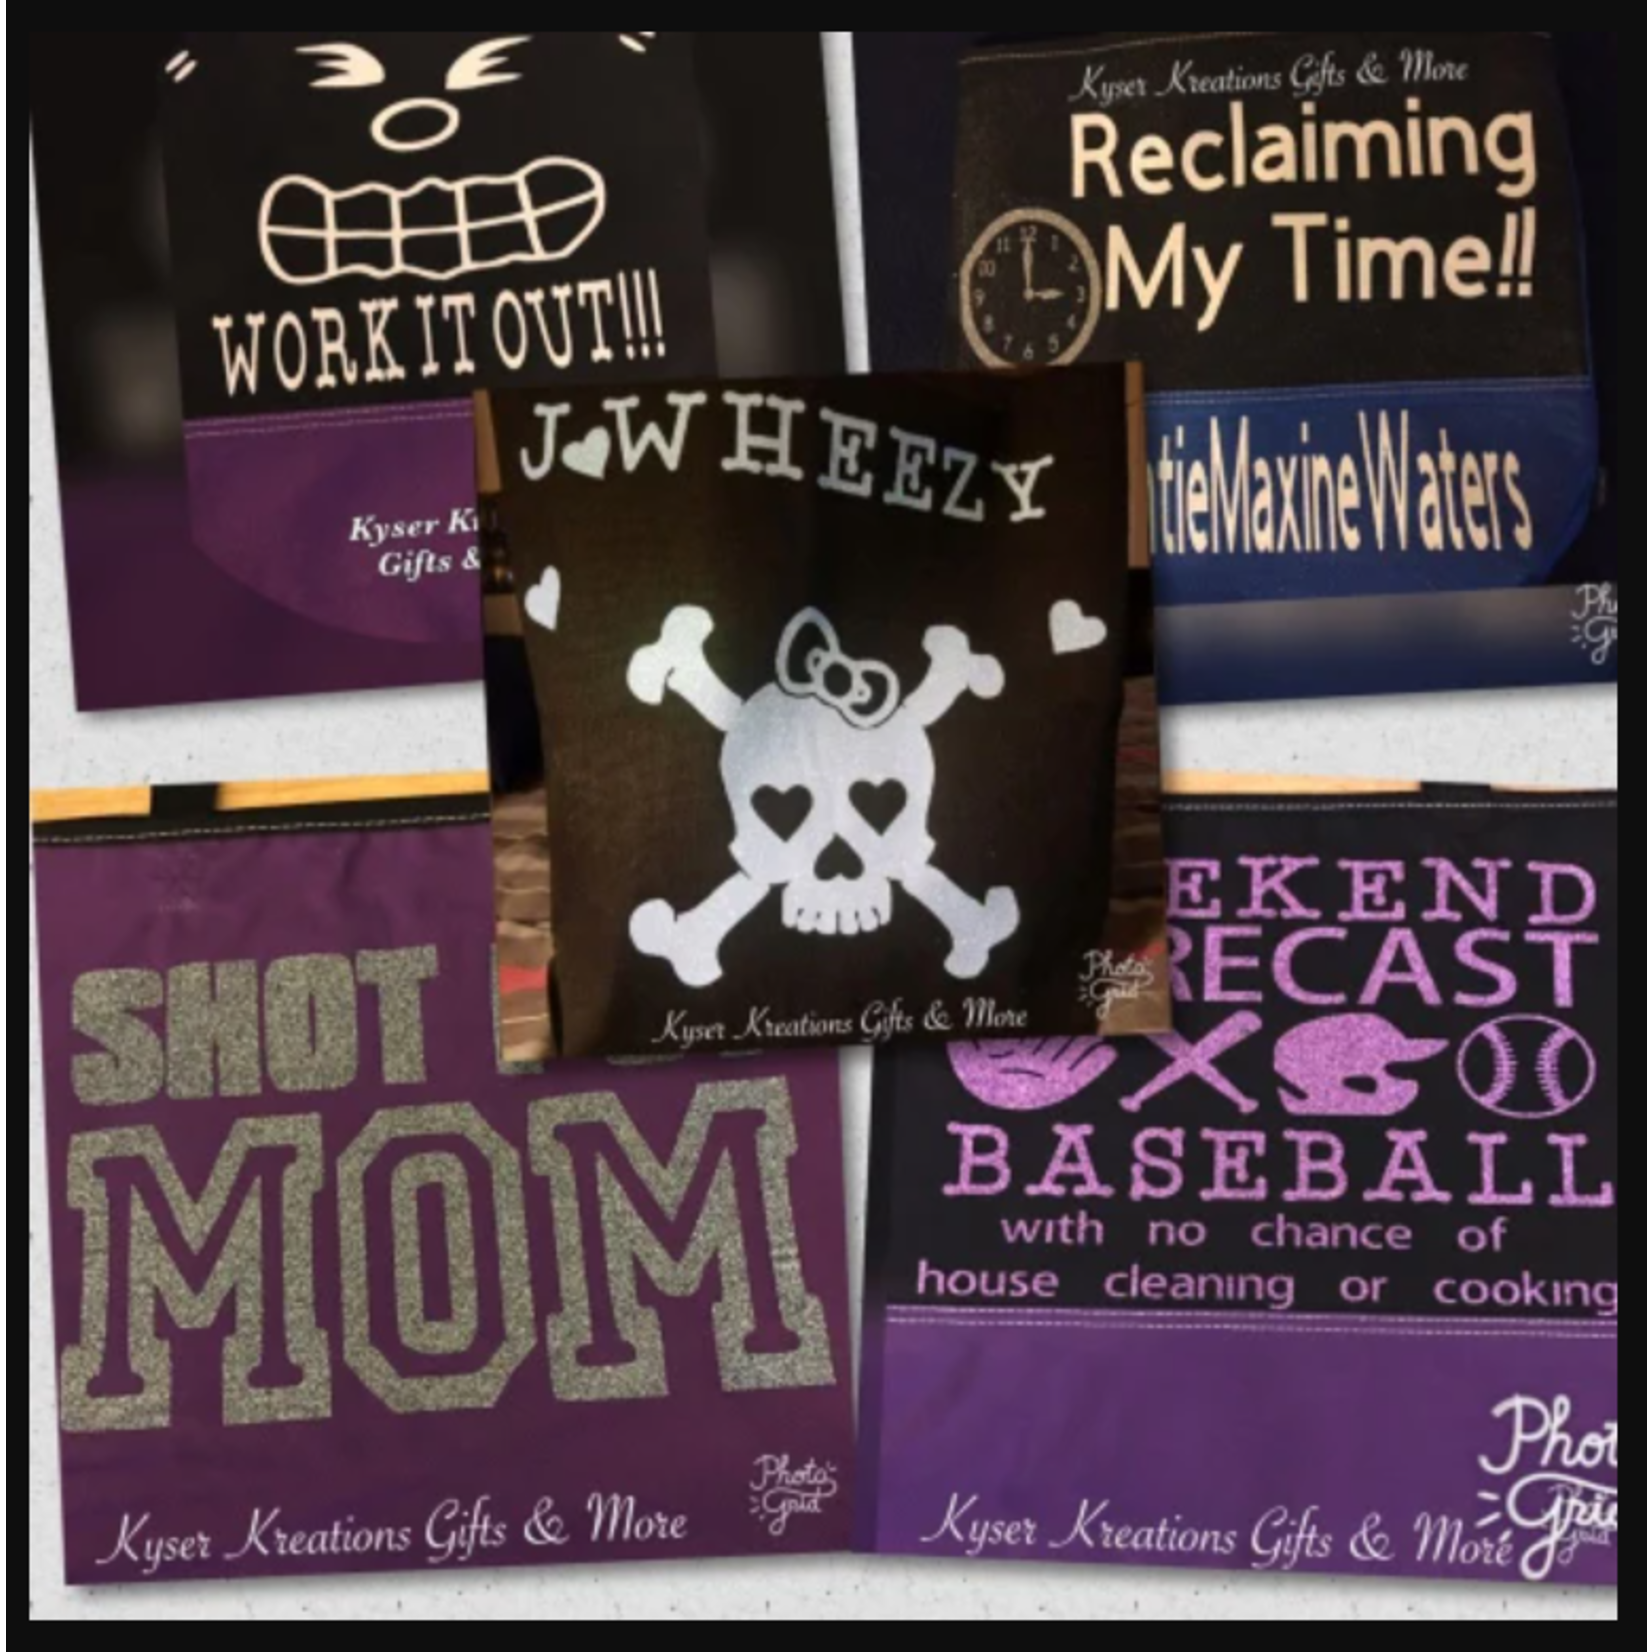 Kyser Kreations Gifts & More-Aurora Kyser Kreations Gifts & More-Aurora $25.00 Personalized Merchandise Certificate